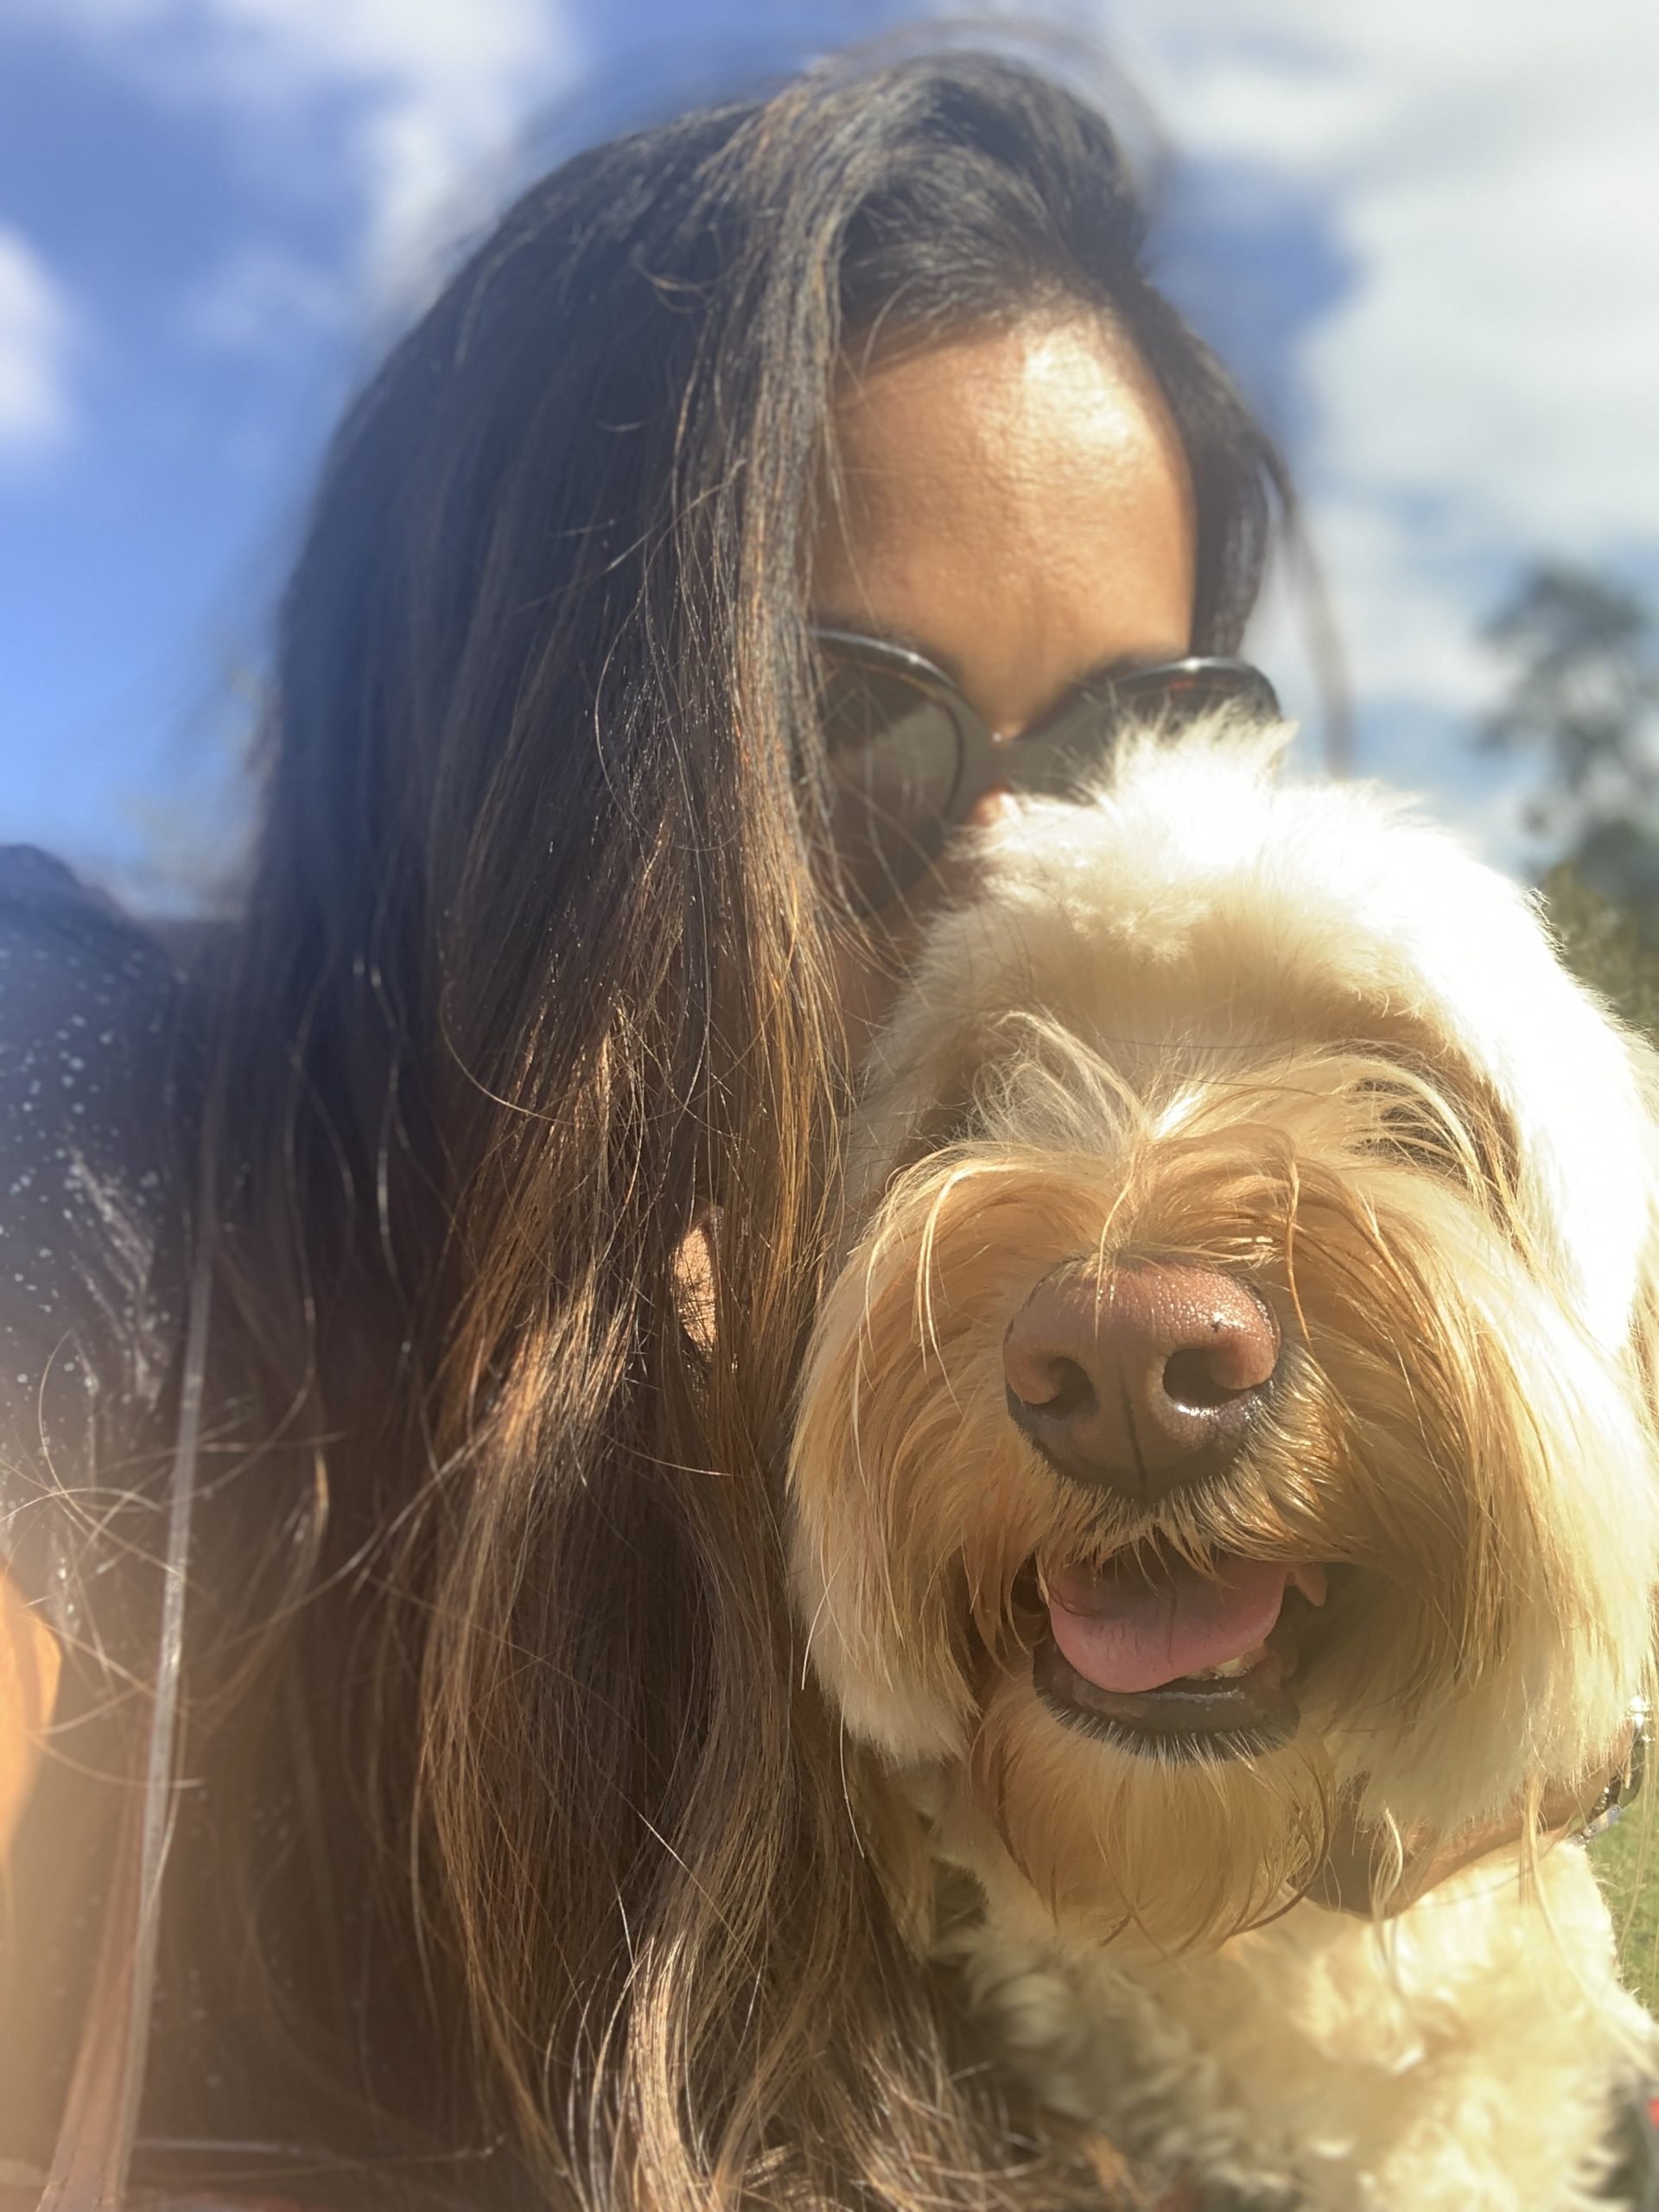 woman with sunglasses poses outside with dog